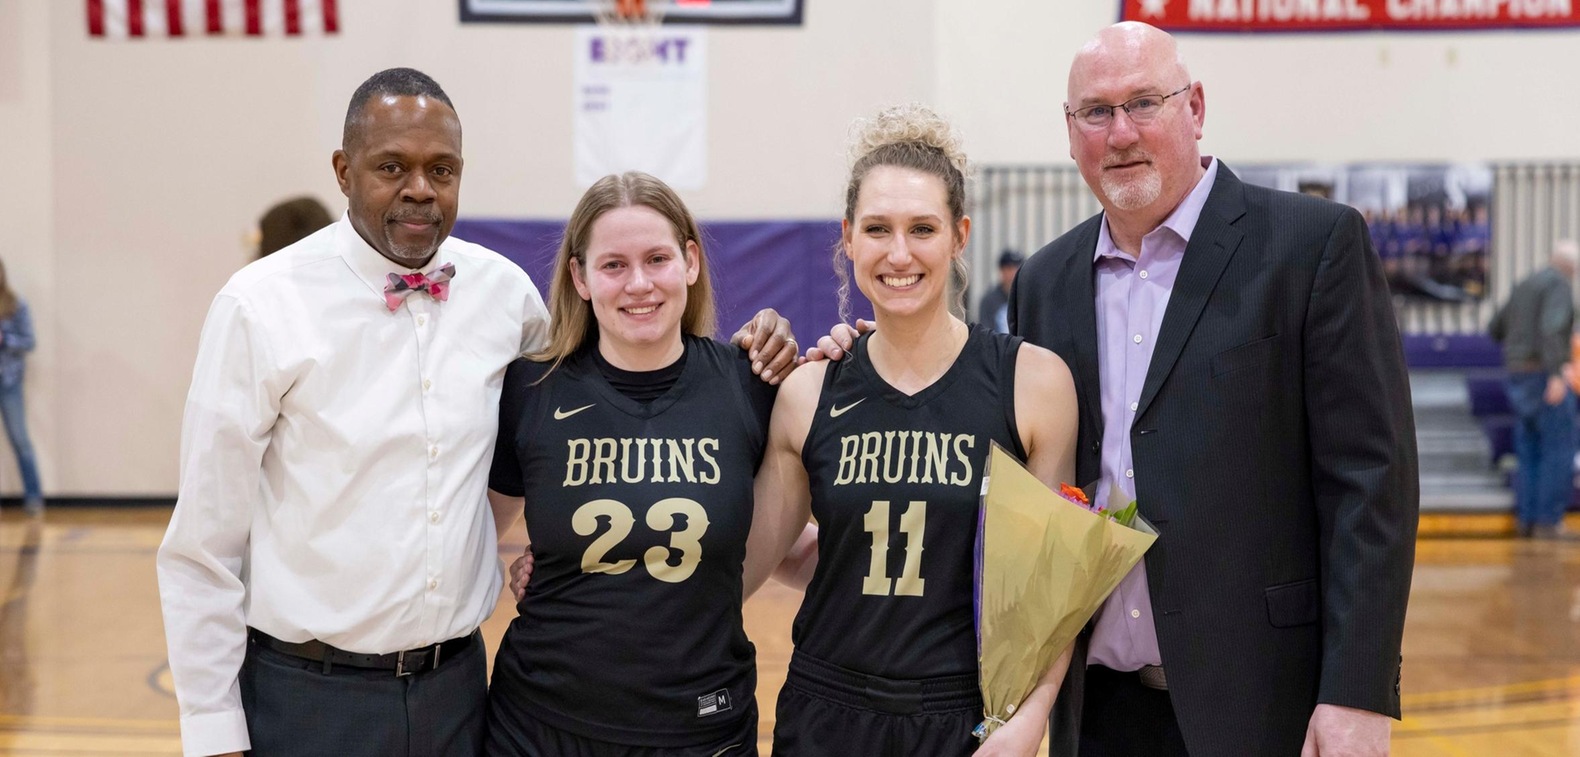 The Bruins' two seniors, Delaney VanBlaricon and Shelby Little, were honored following the contest.